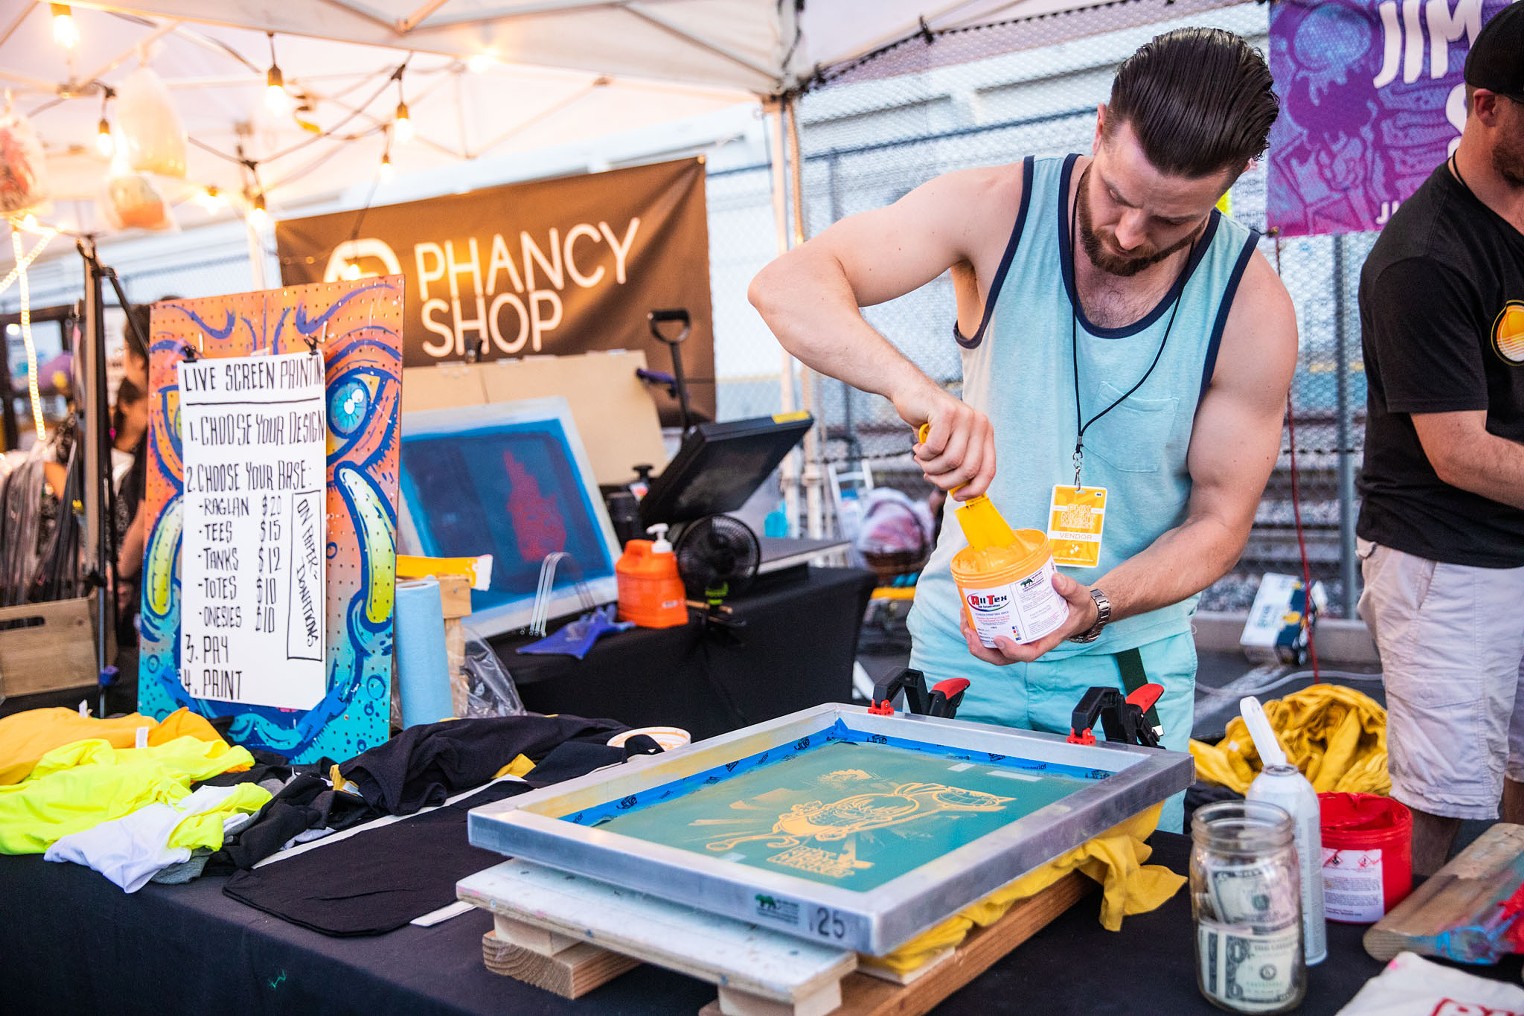 Phx Night Market Took Place in Downtown Phoenix April 2021, 2019